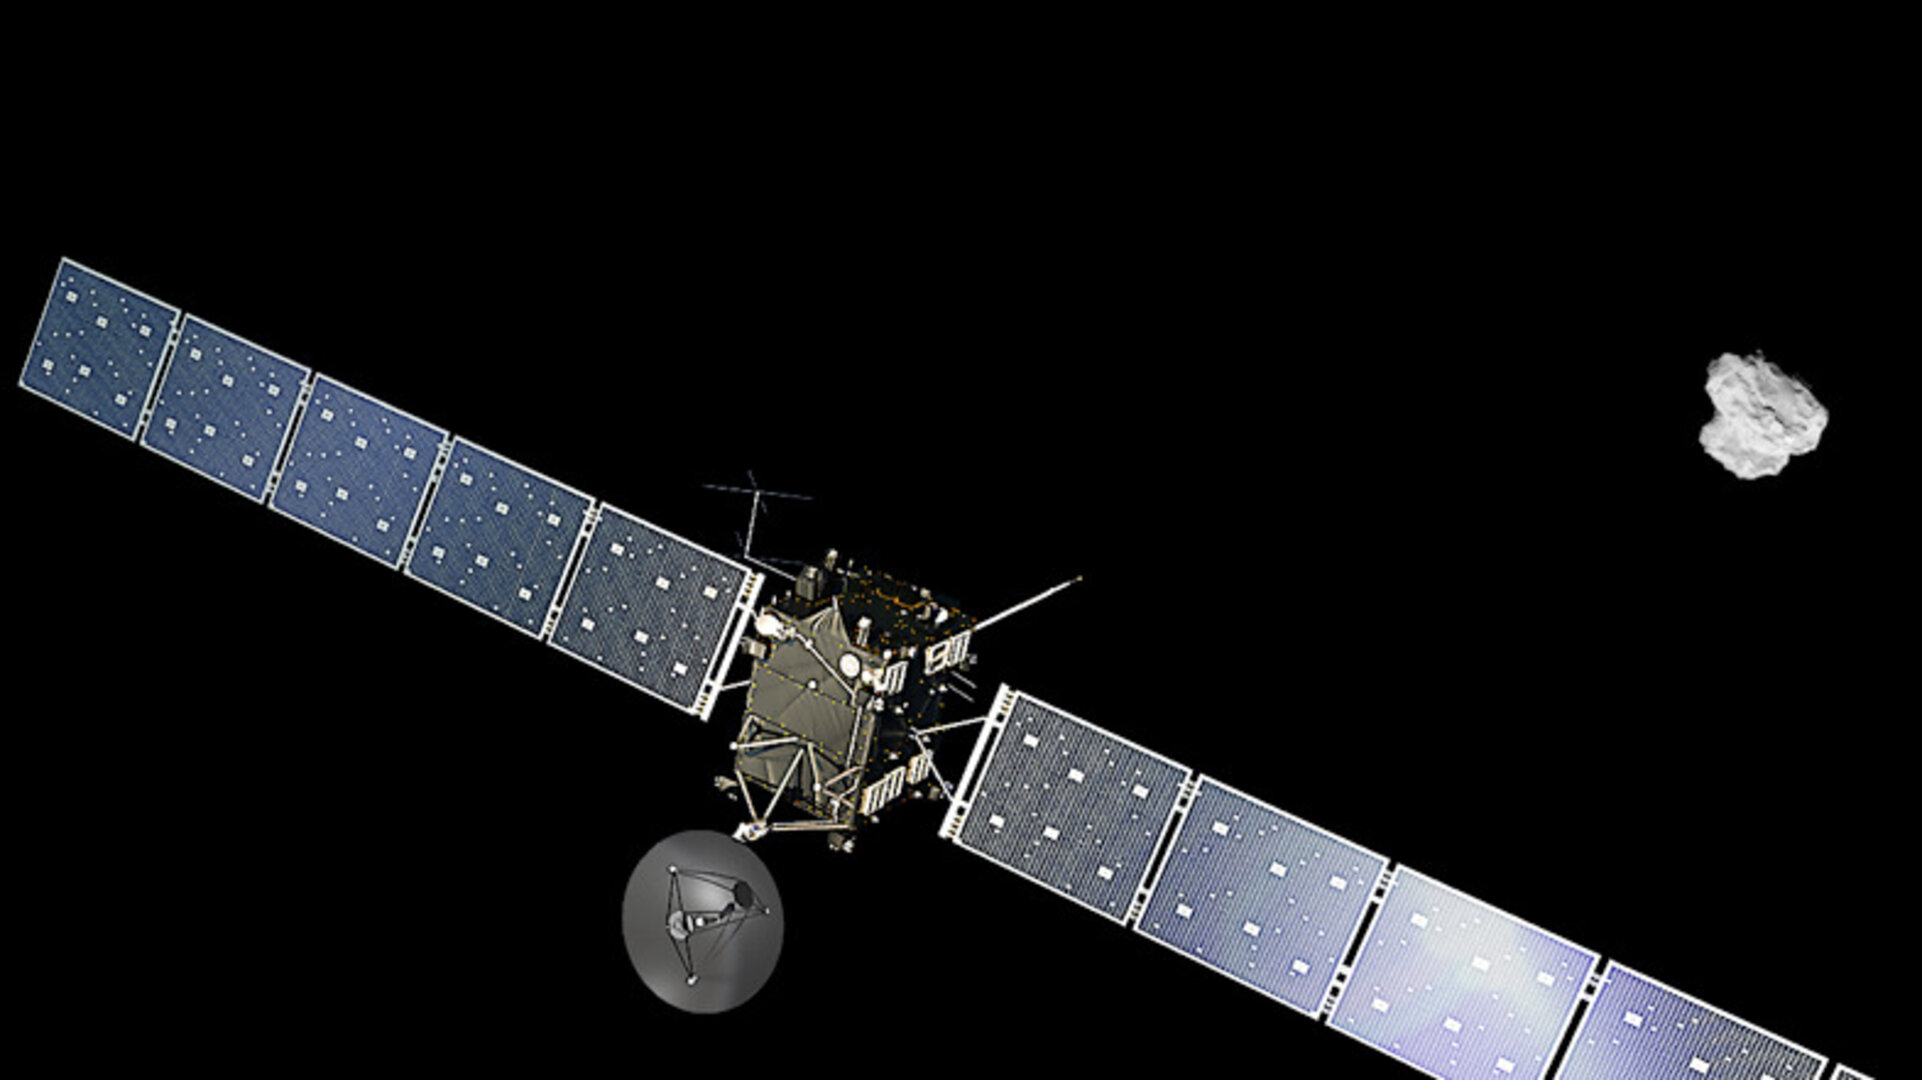 The European Space Agency's History-Making Rosetta Mission